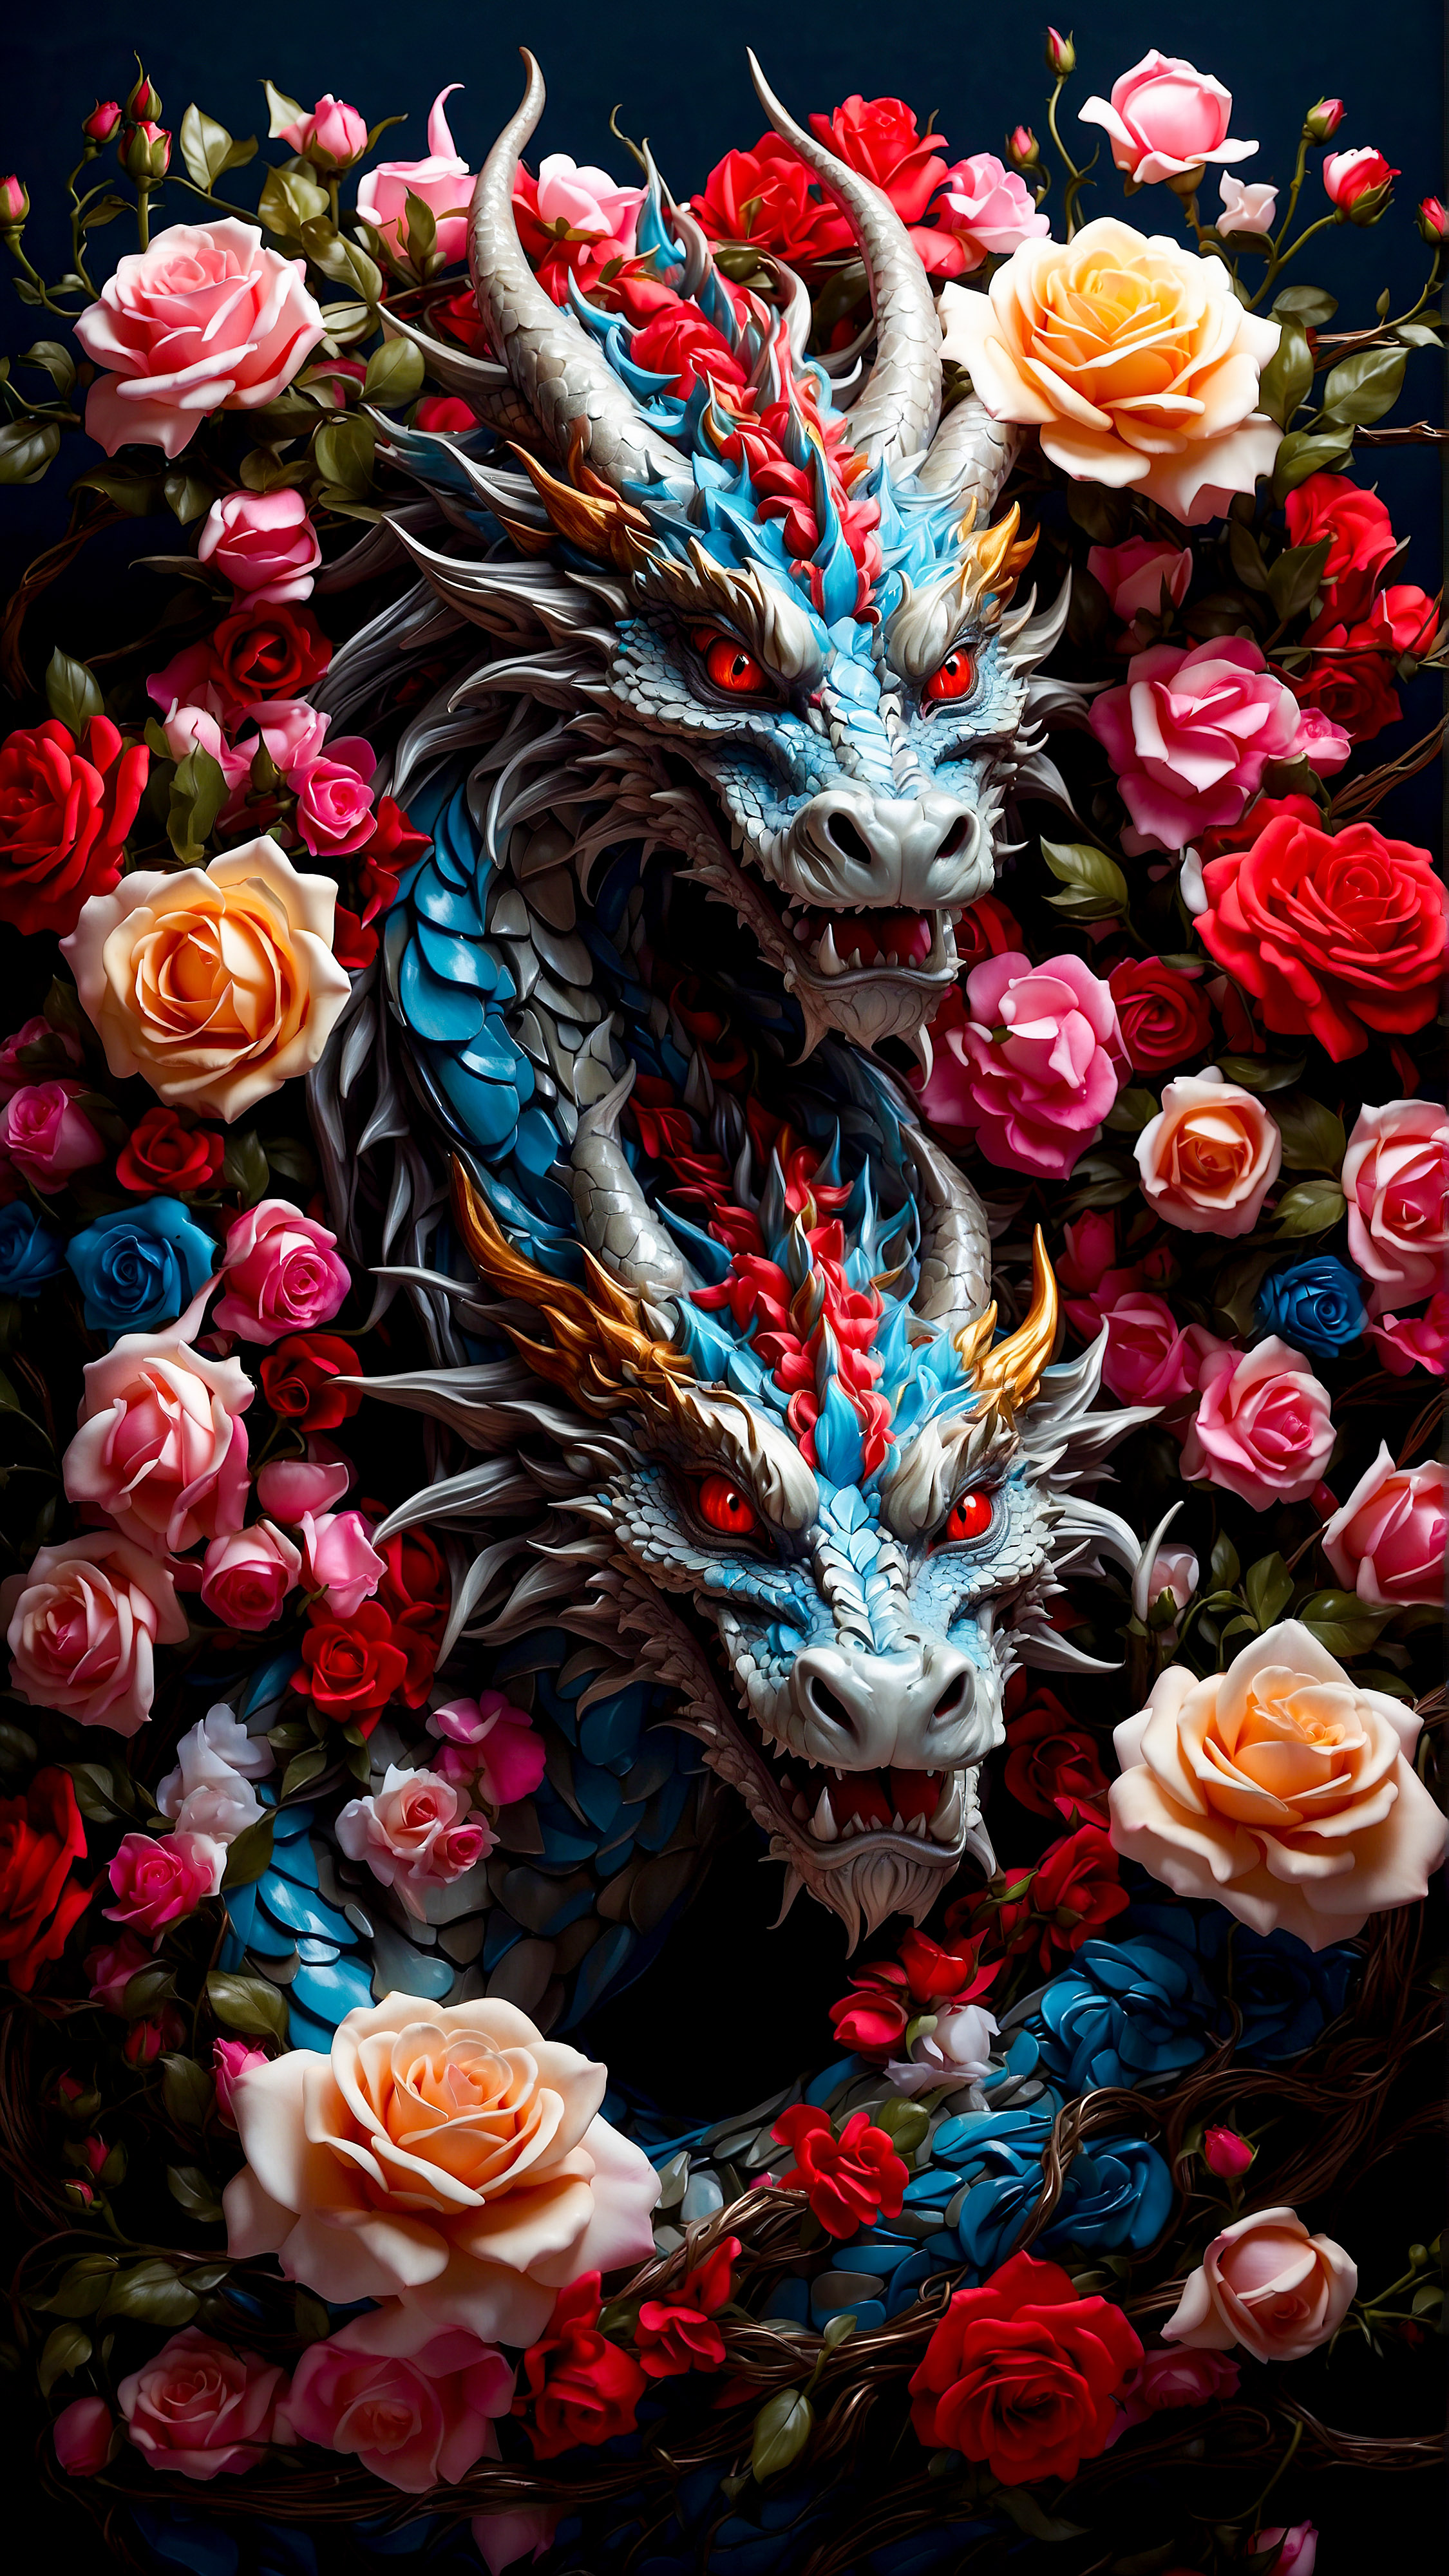 Experience the power of aesthetics with our lock screen wallpaper for iPhone, featuring a vibrant and colorful illustration of a dragon intertwined with beautiful roses against a dark background.